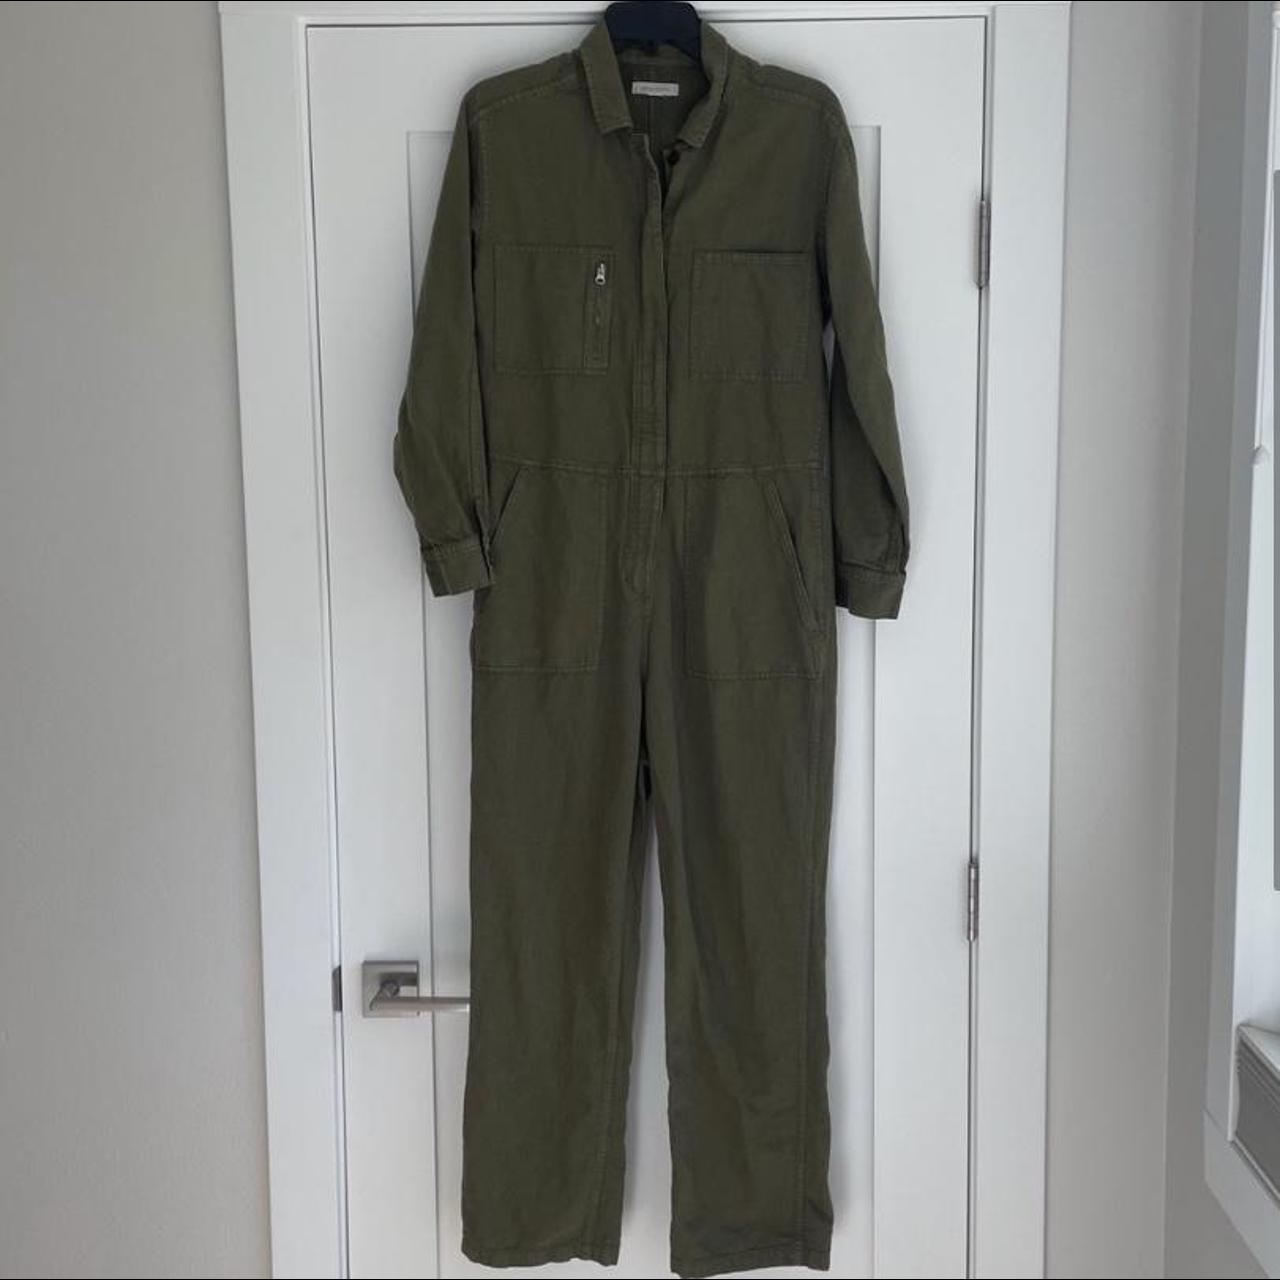 Outerknown station jumpsuit workwear coveralls... - Depop